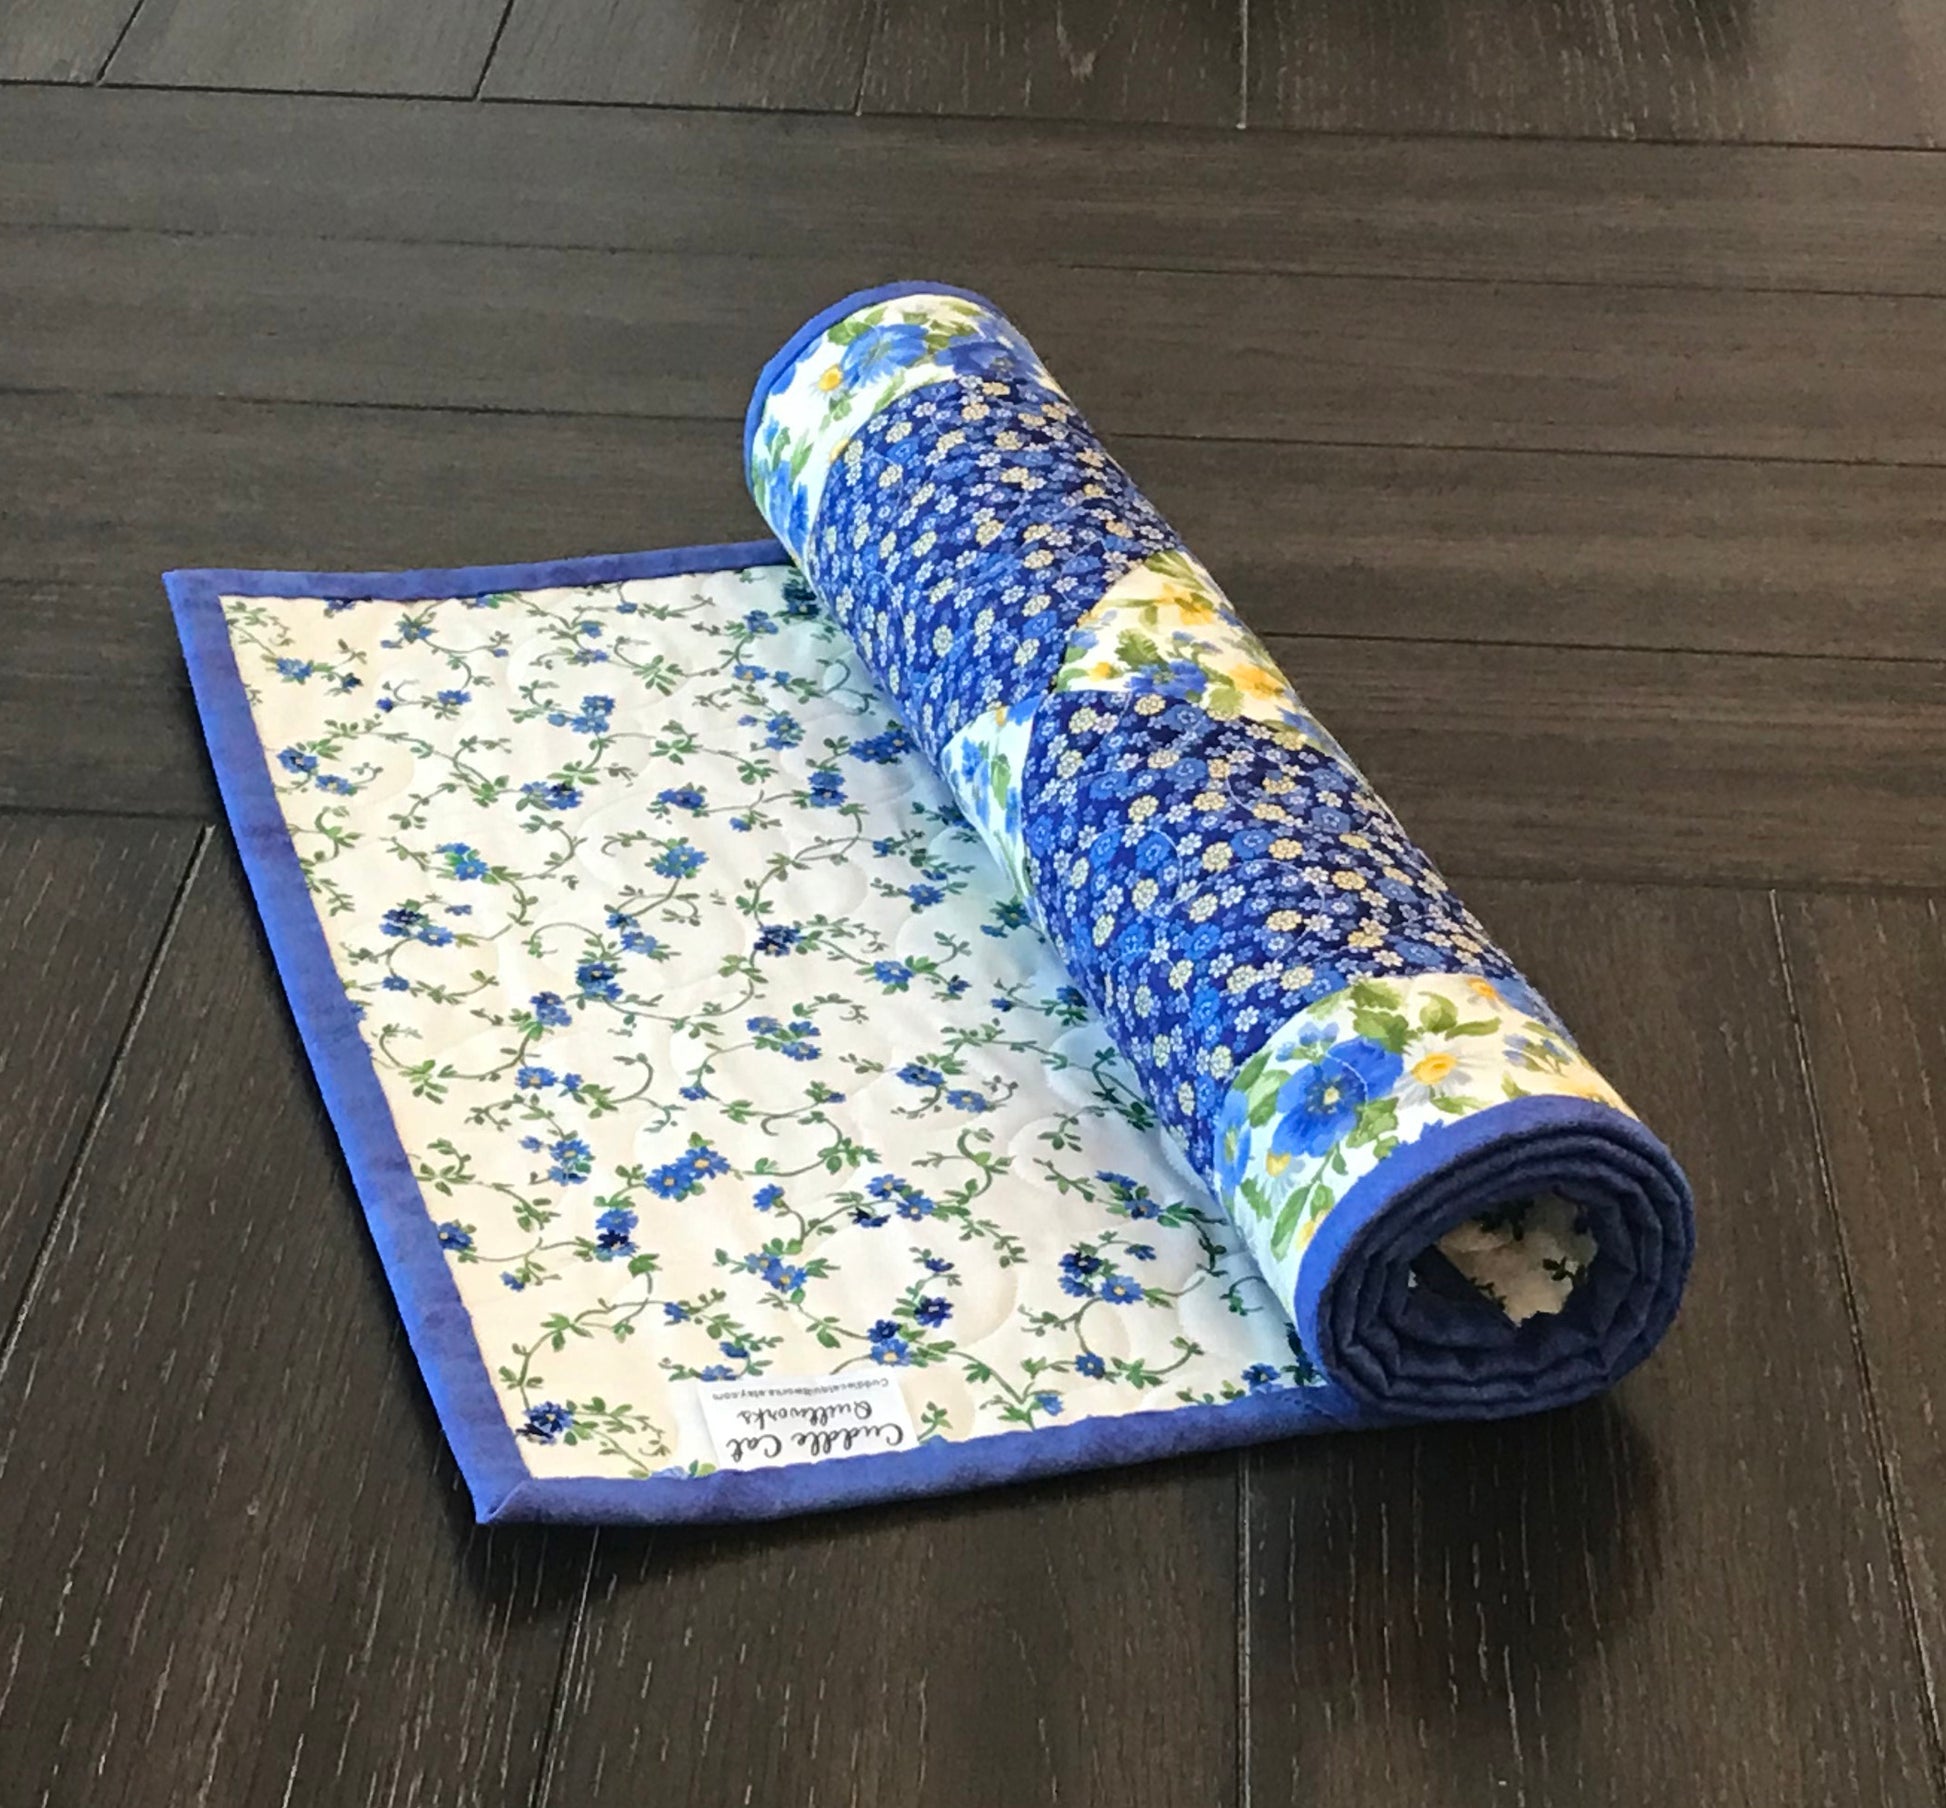 Blue and yellow floral table runner with a center diamond pattern displayed rolled up on a table